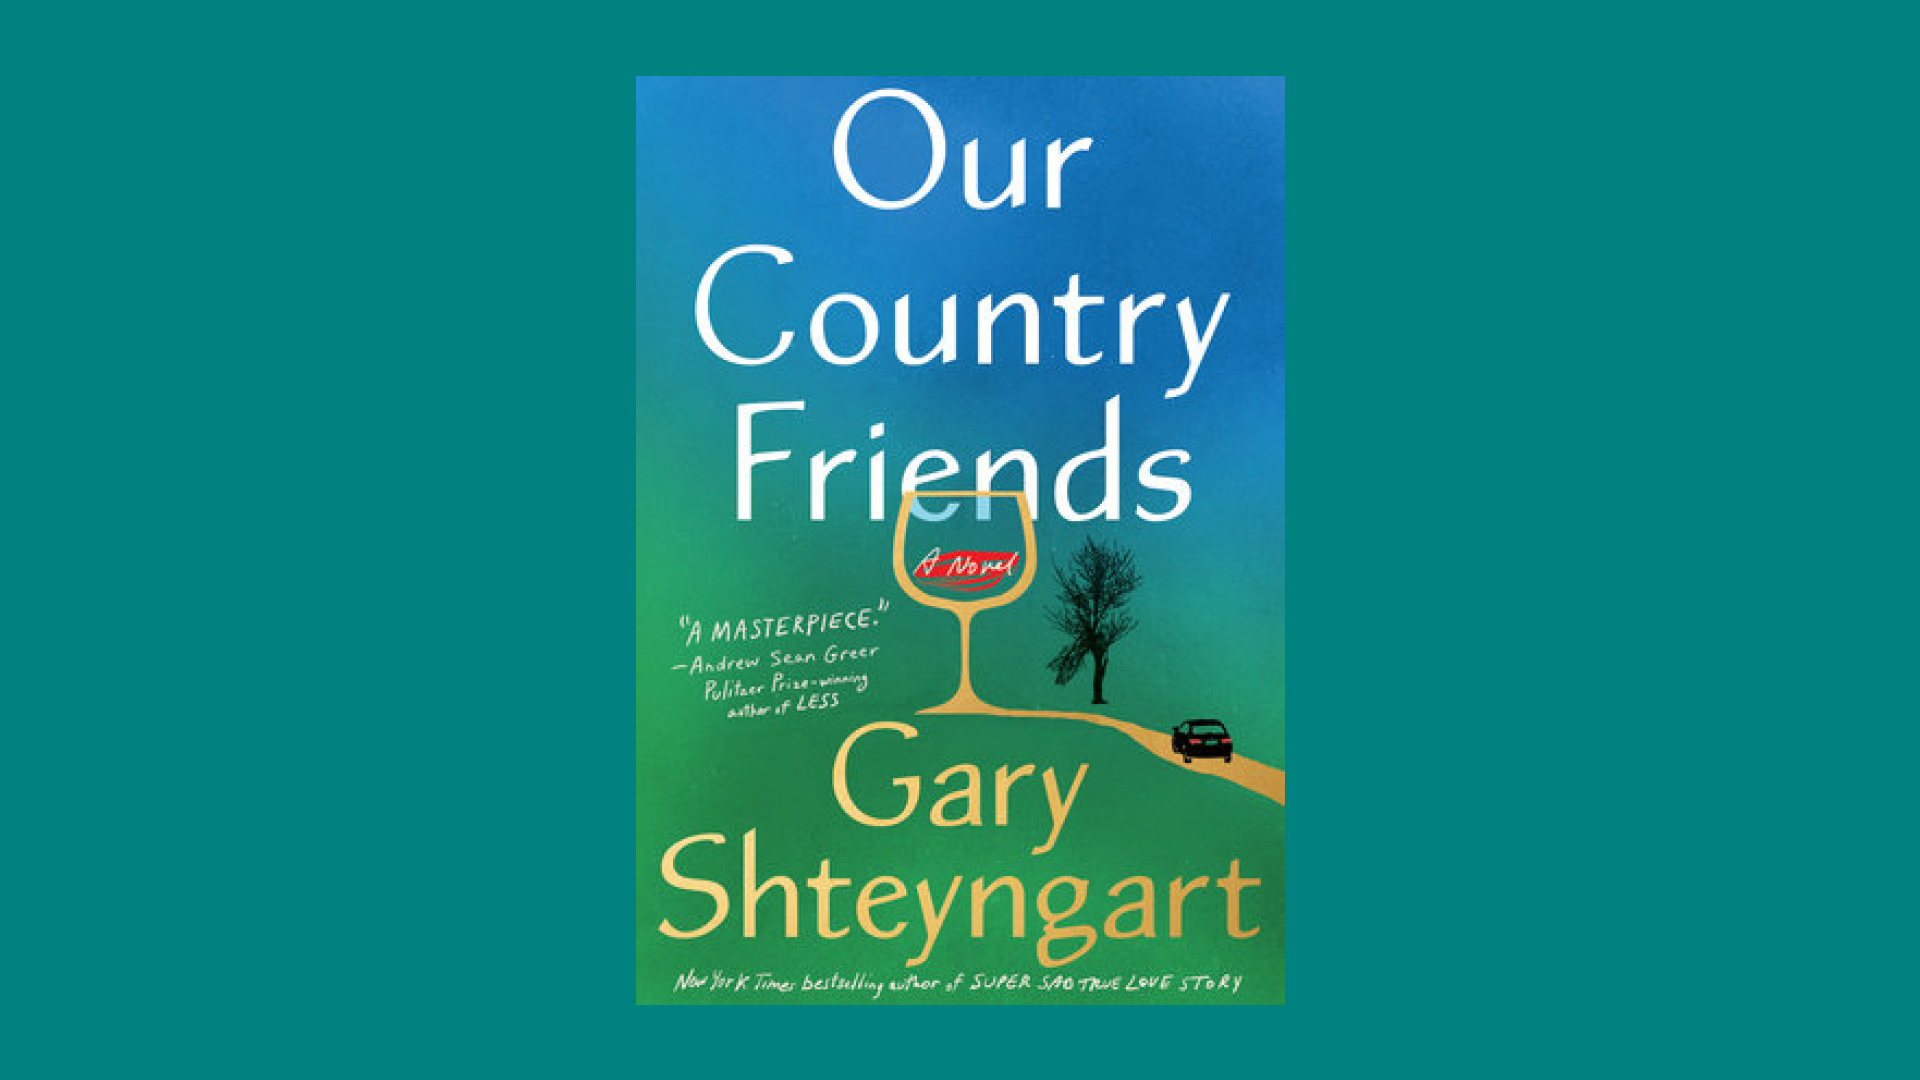 “Our Country Friends” by Gary Shteyngart